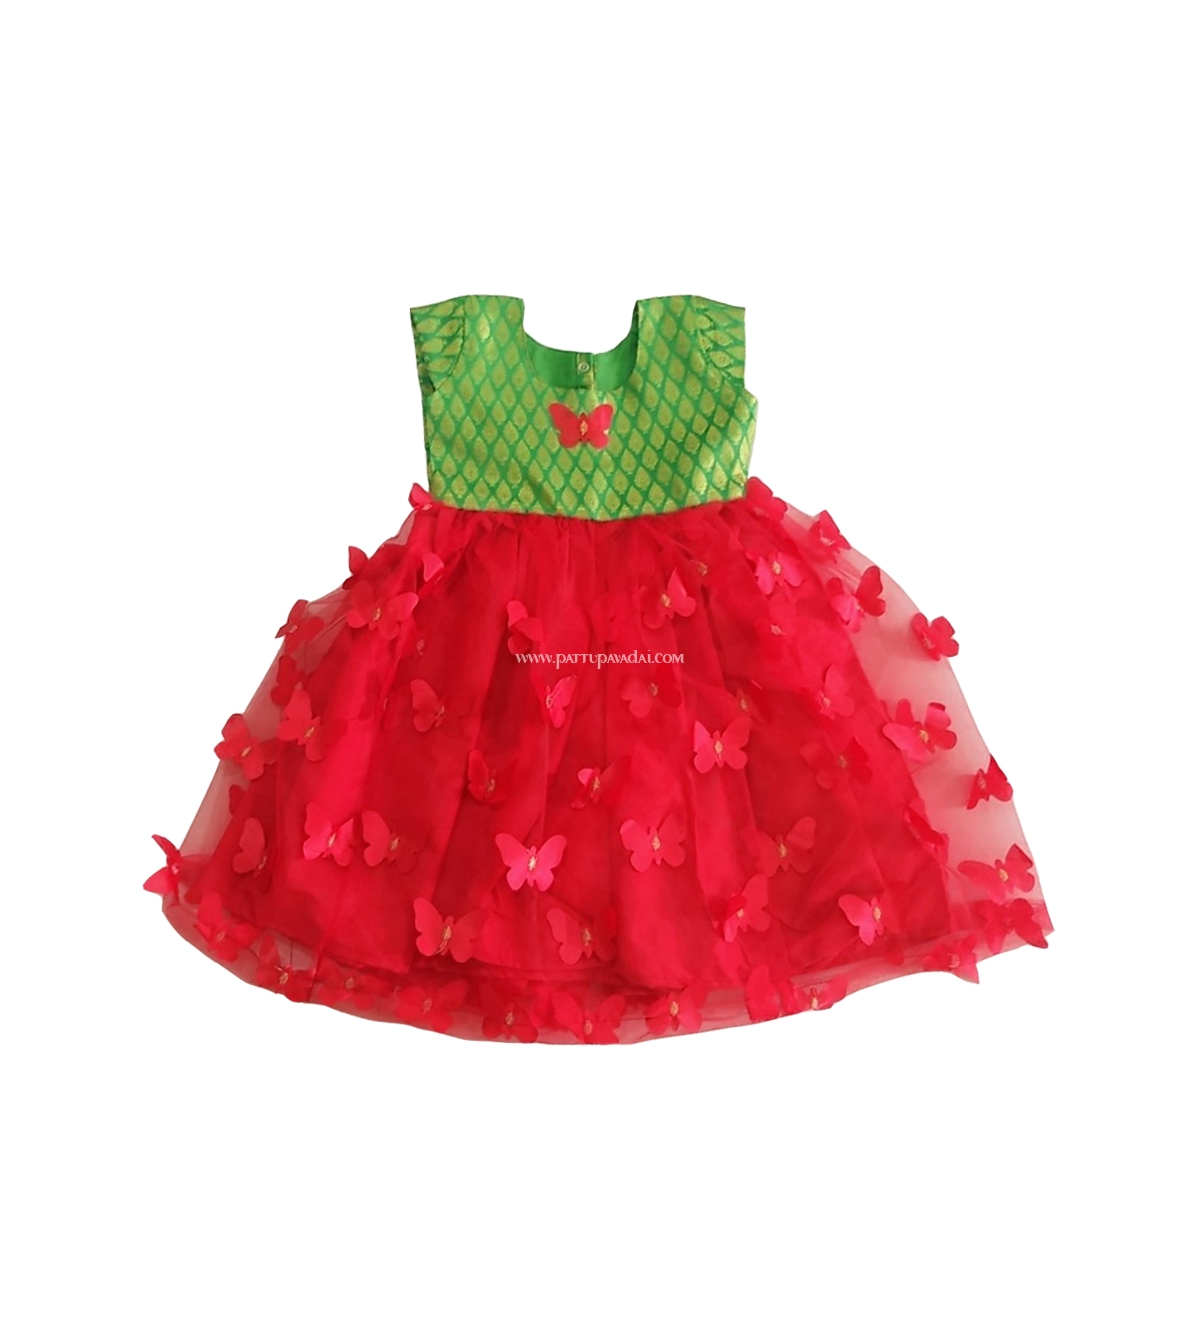 Netted Frock Red and Parrot Green